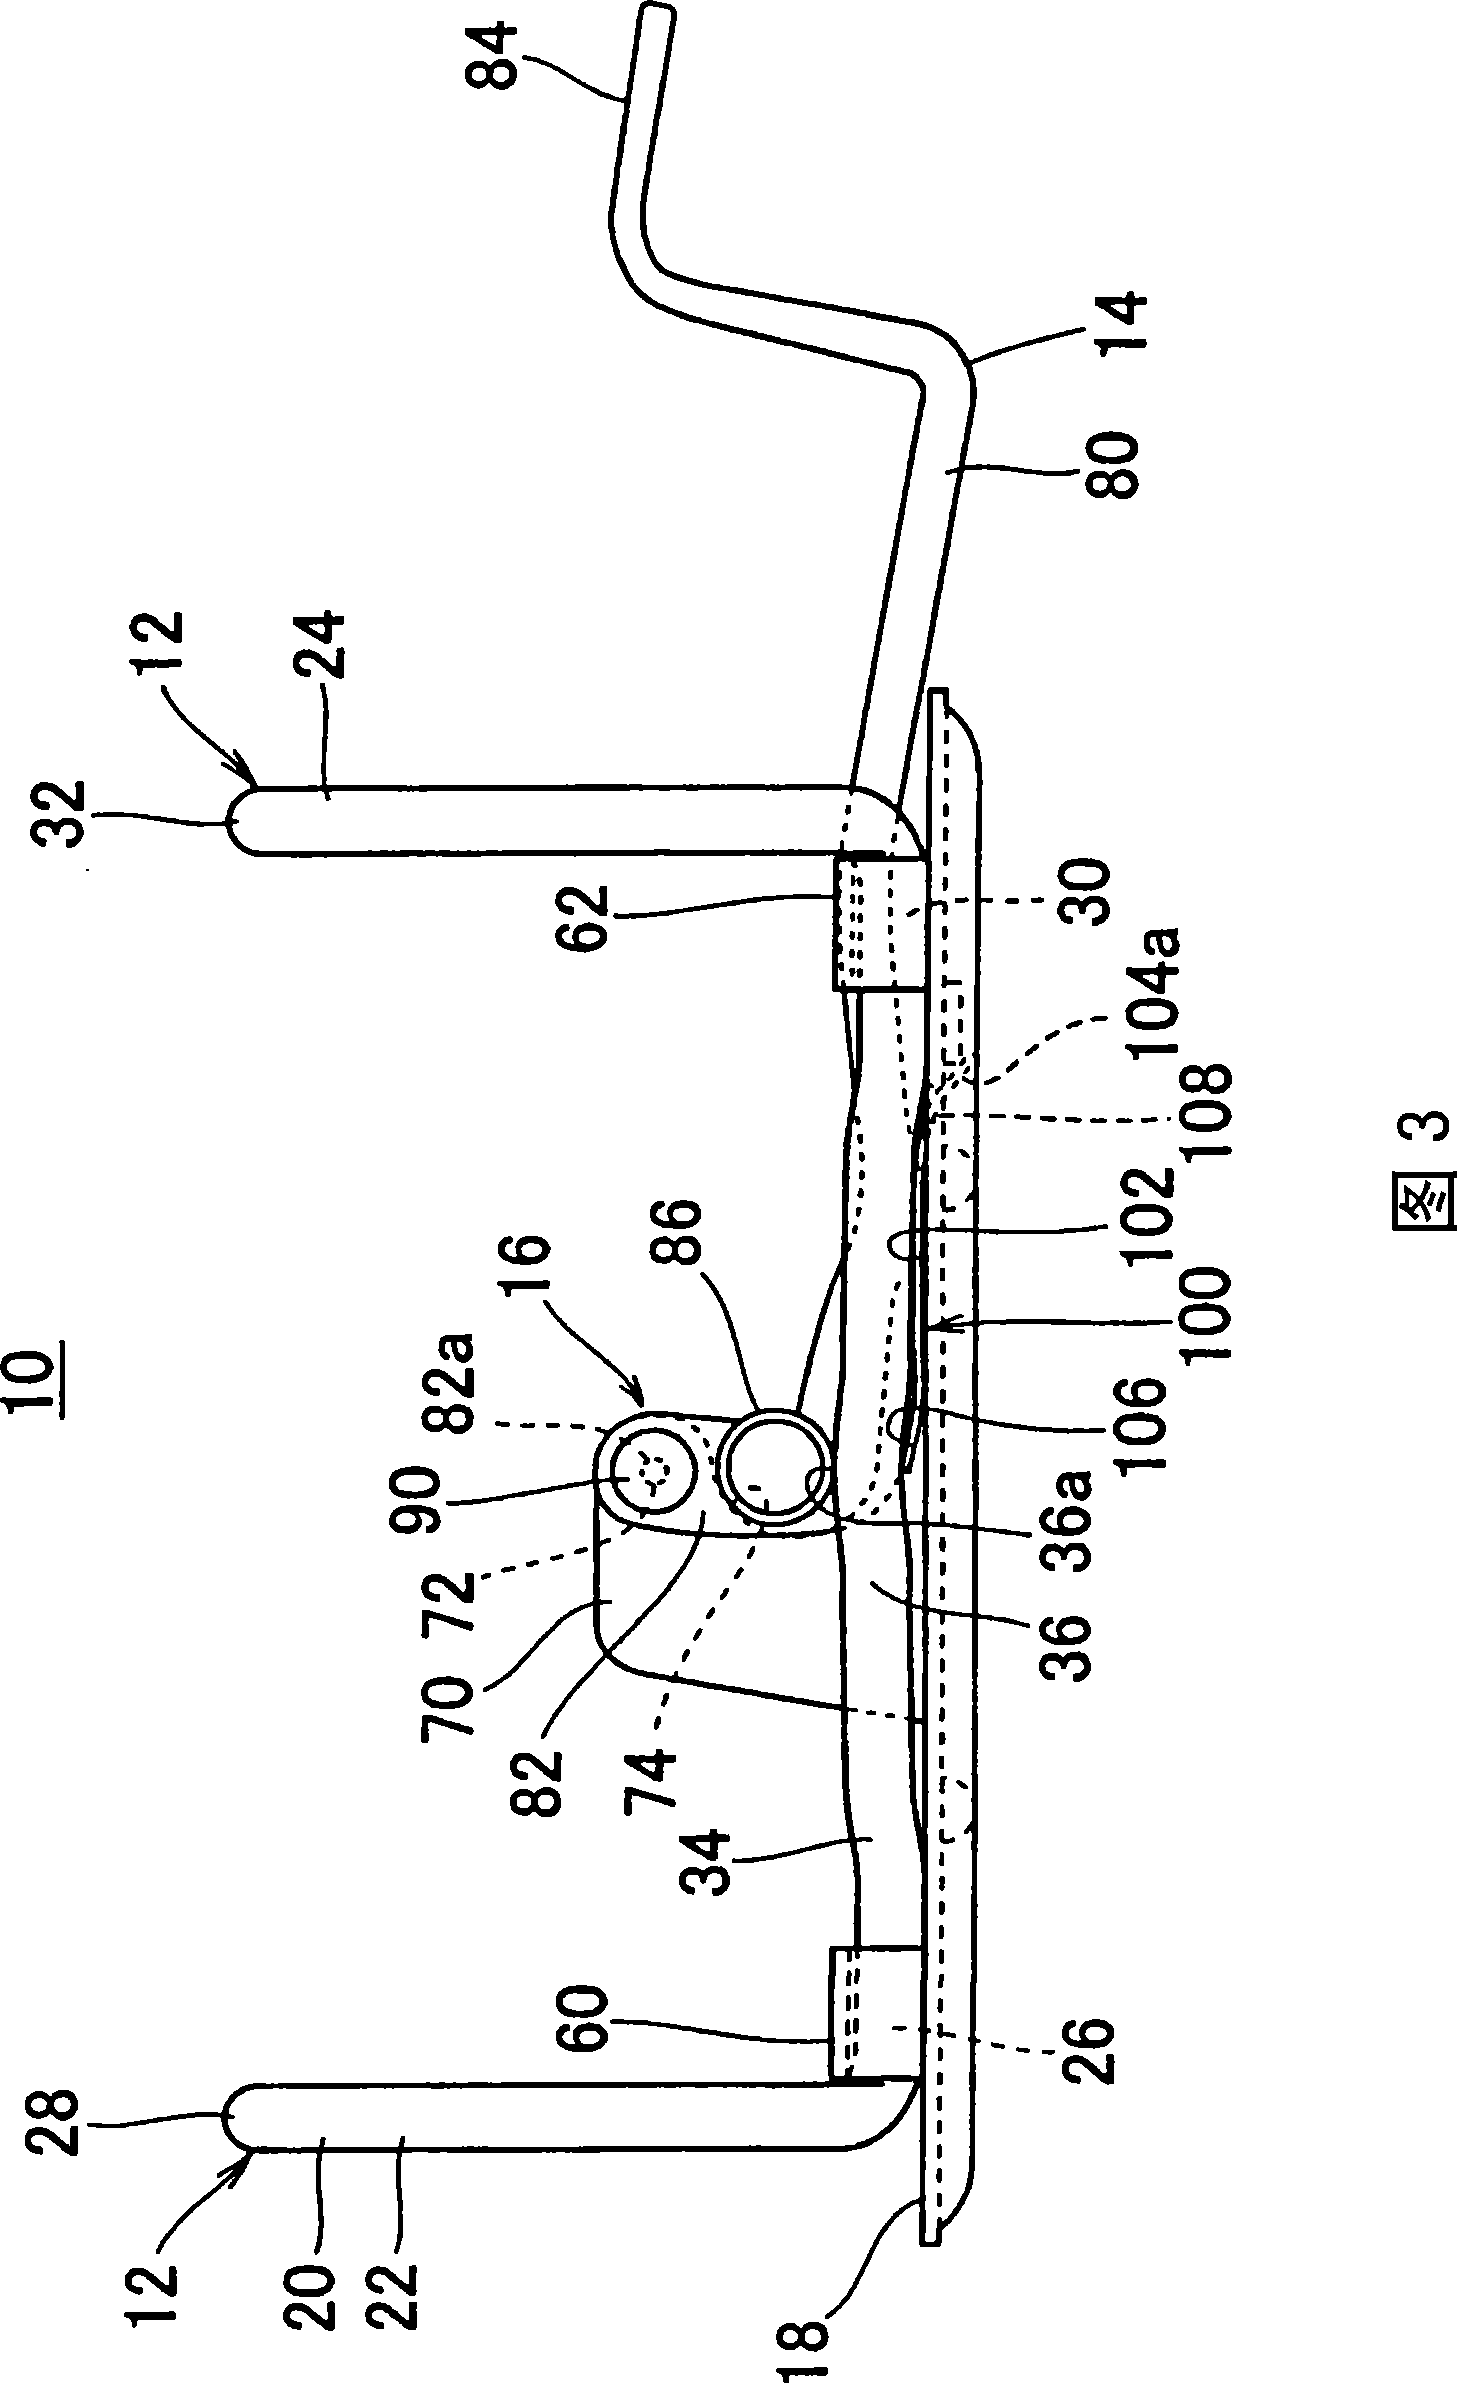 Binding device for files and binders